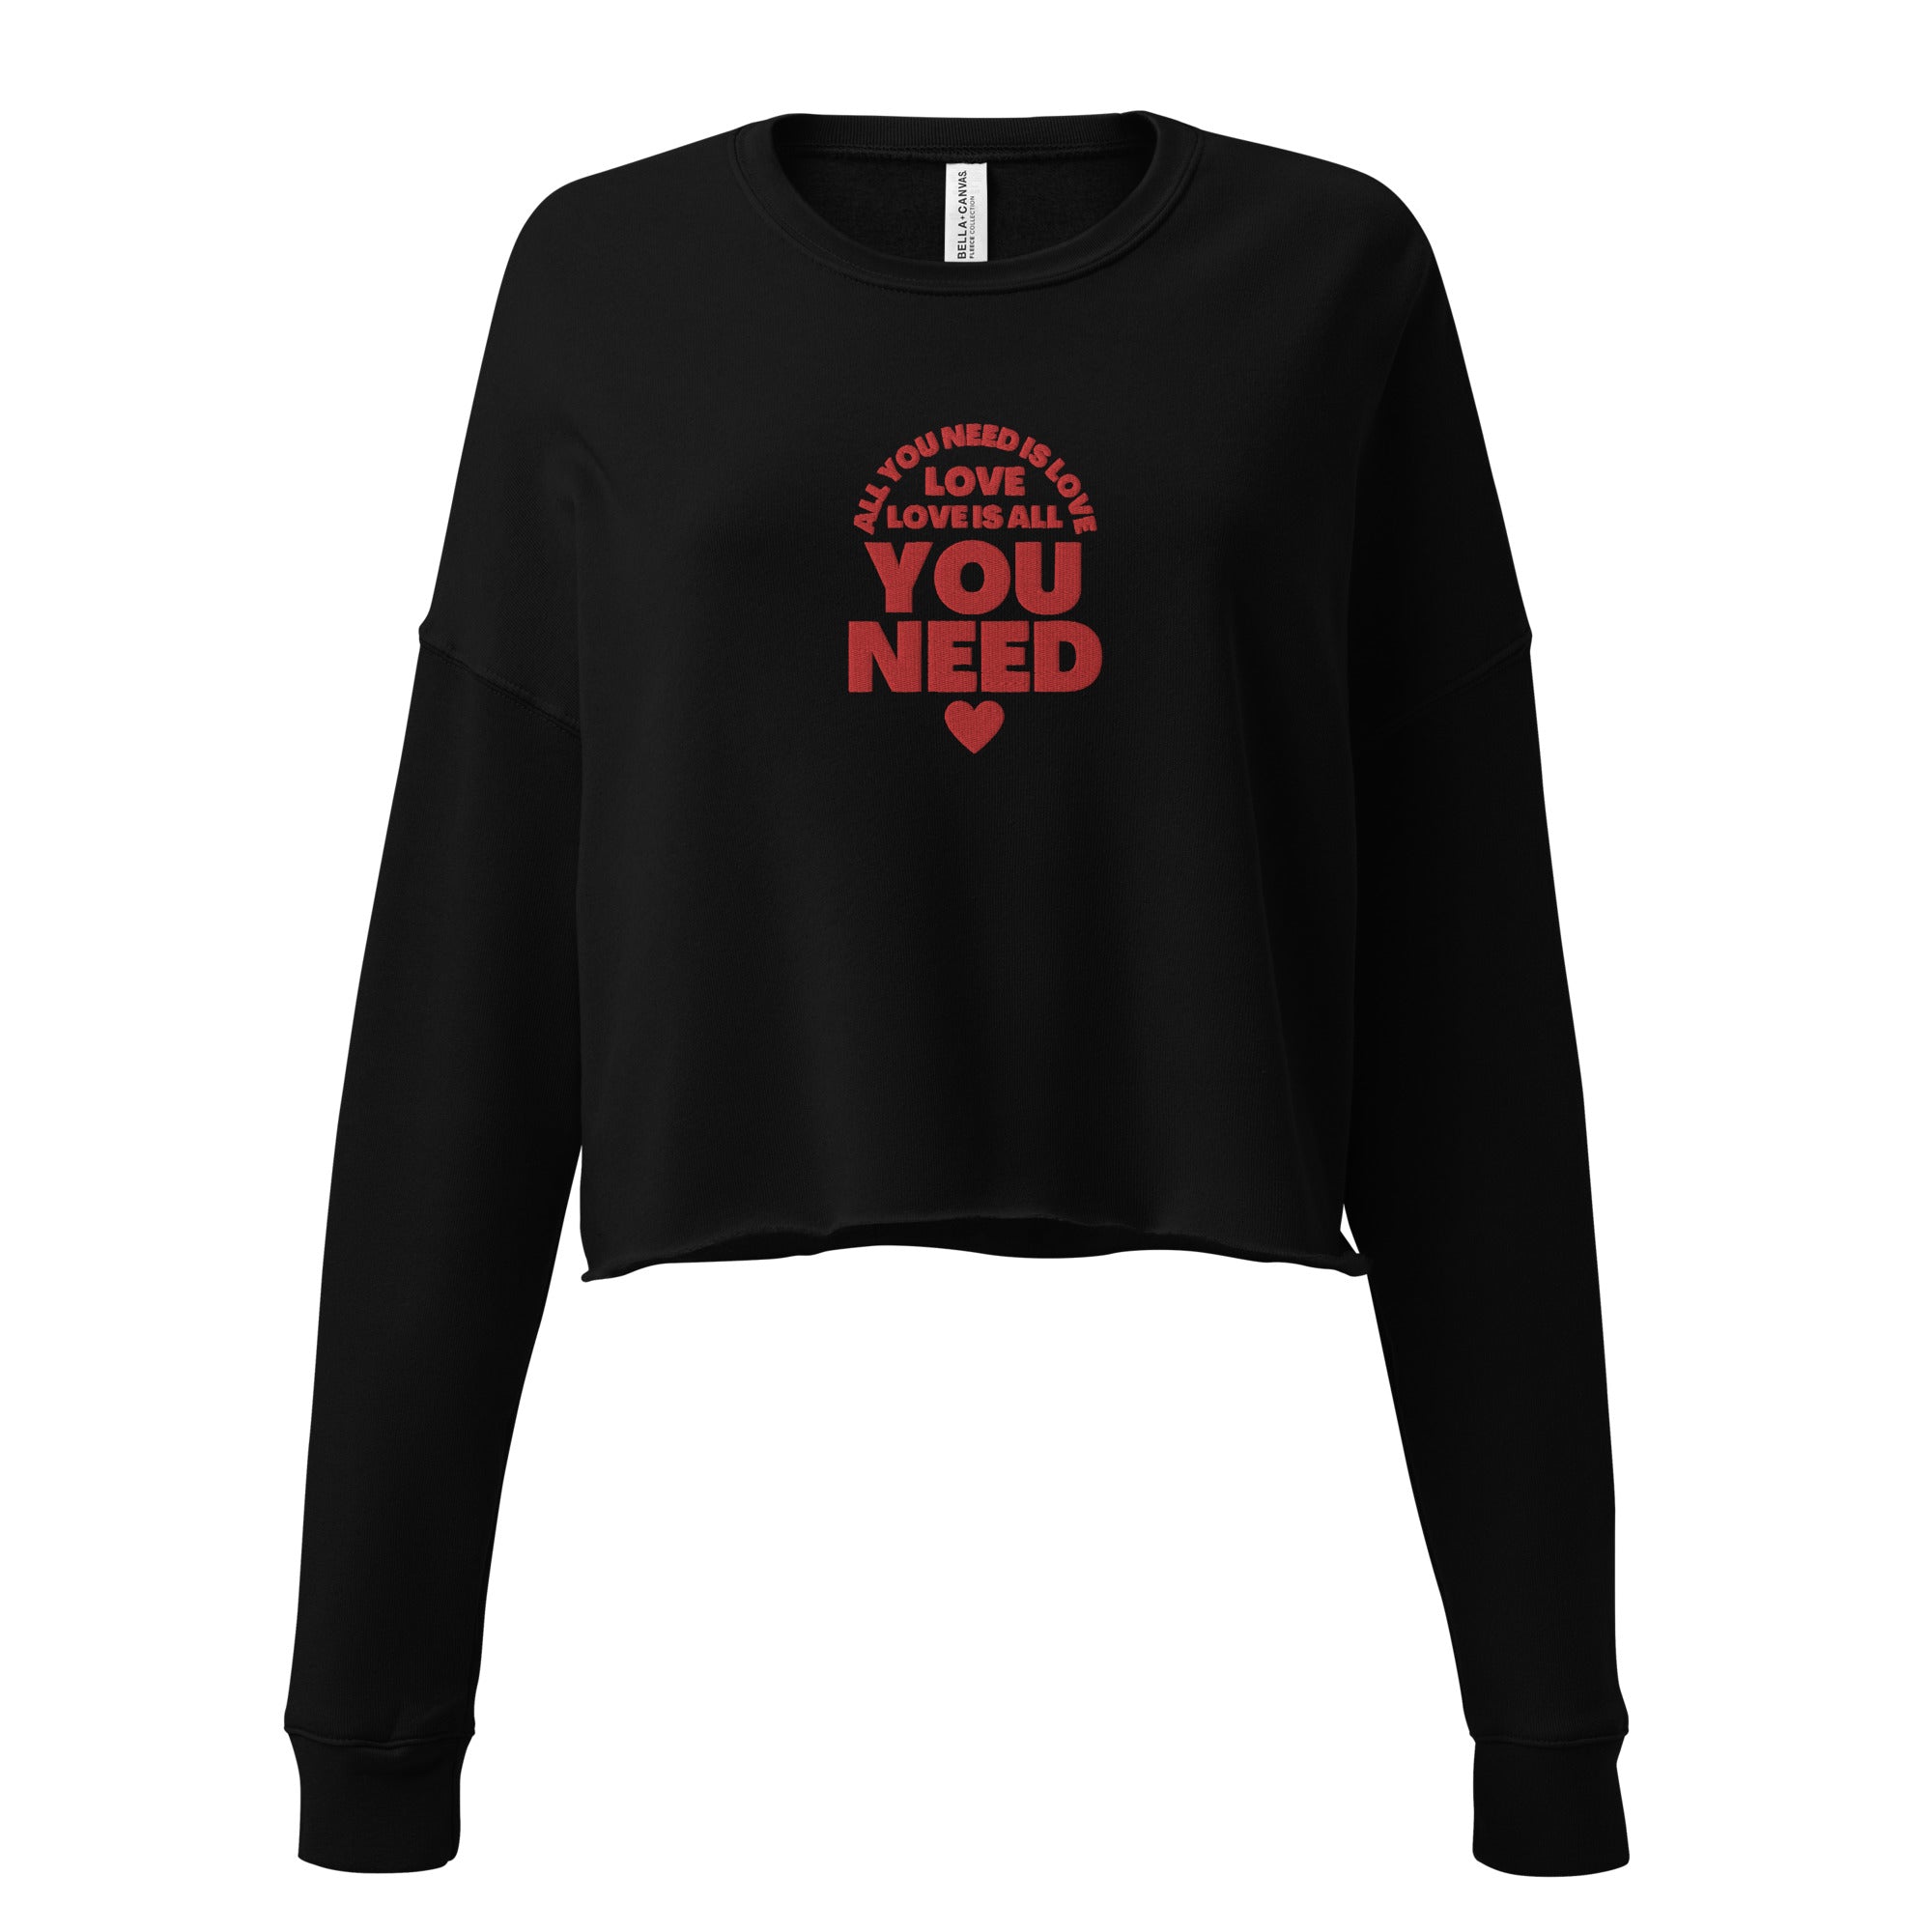 All You Need Is Love Premium Embroidered Women's Crop Sweatshirt - Inspired by The Beatles